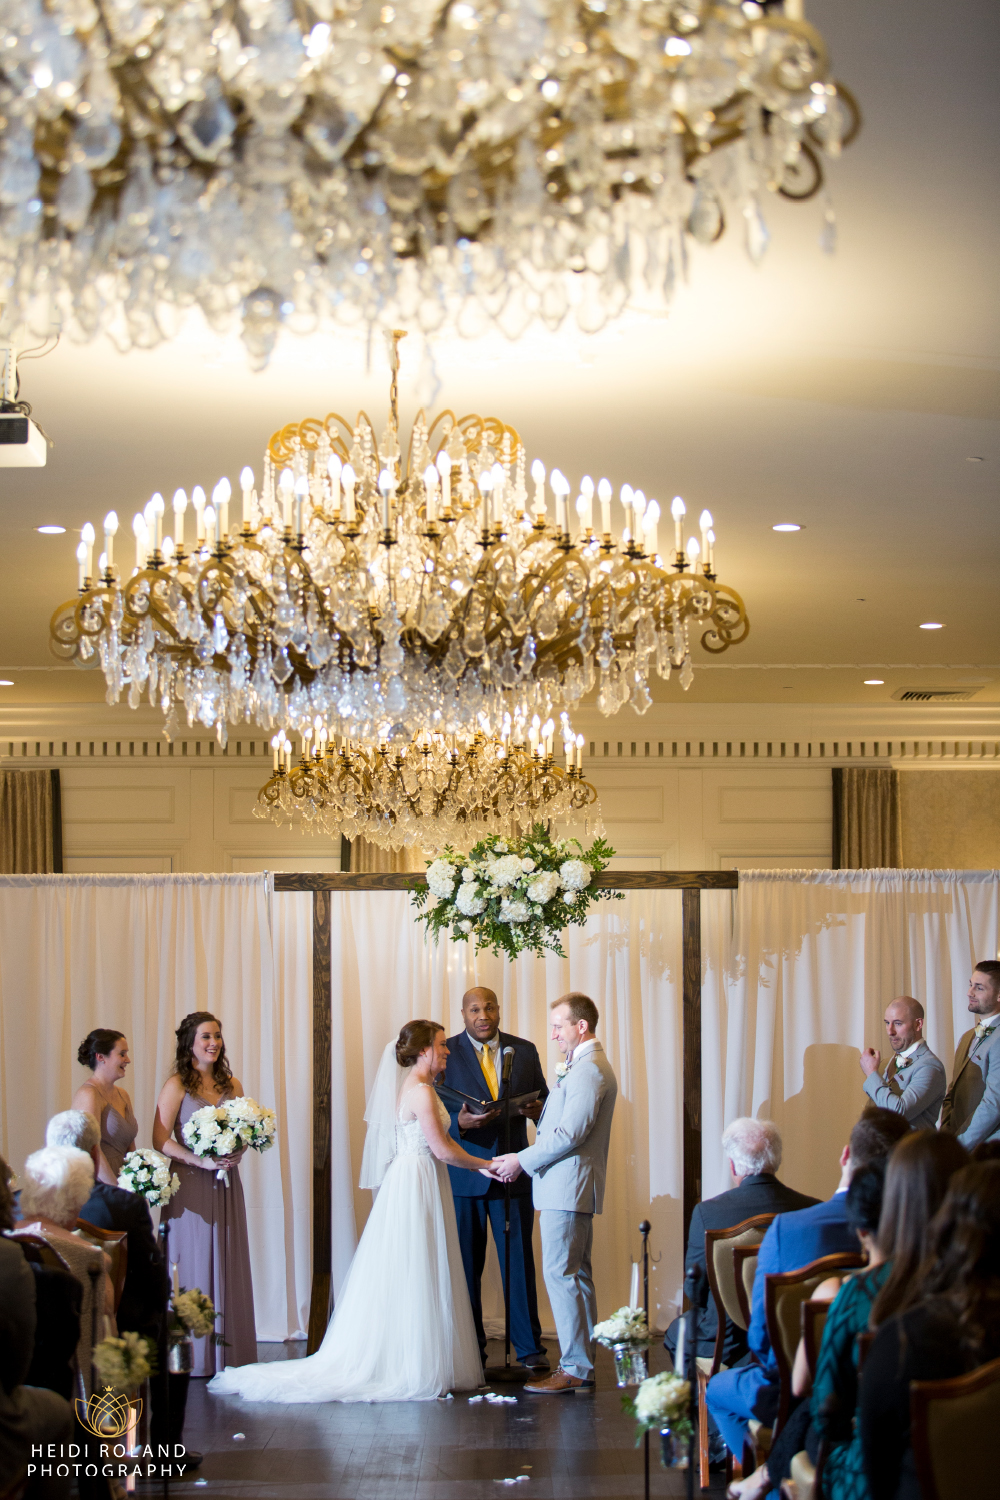 Blue Bell Country Club Winter Wedding